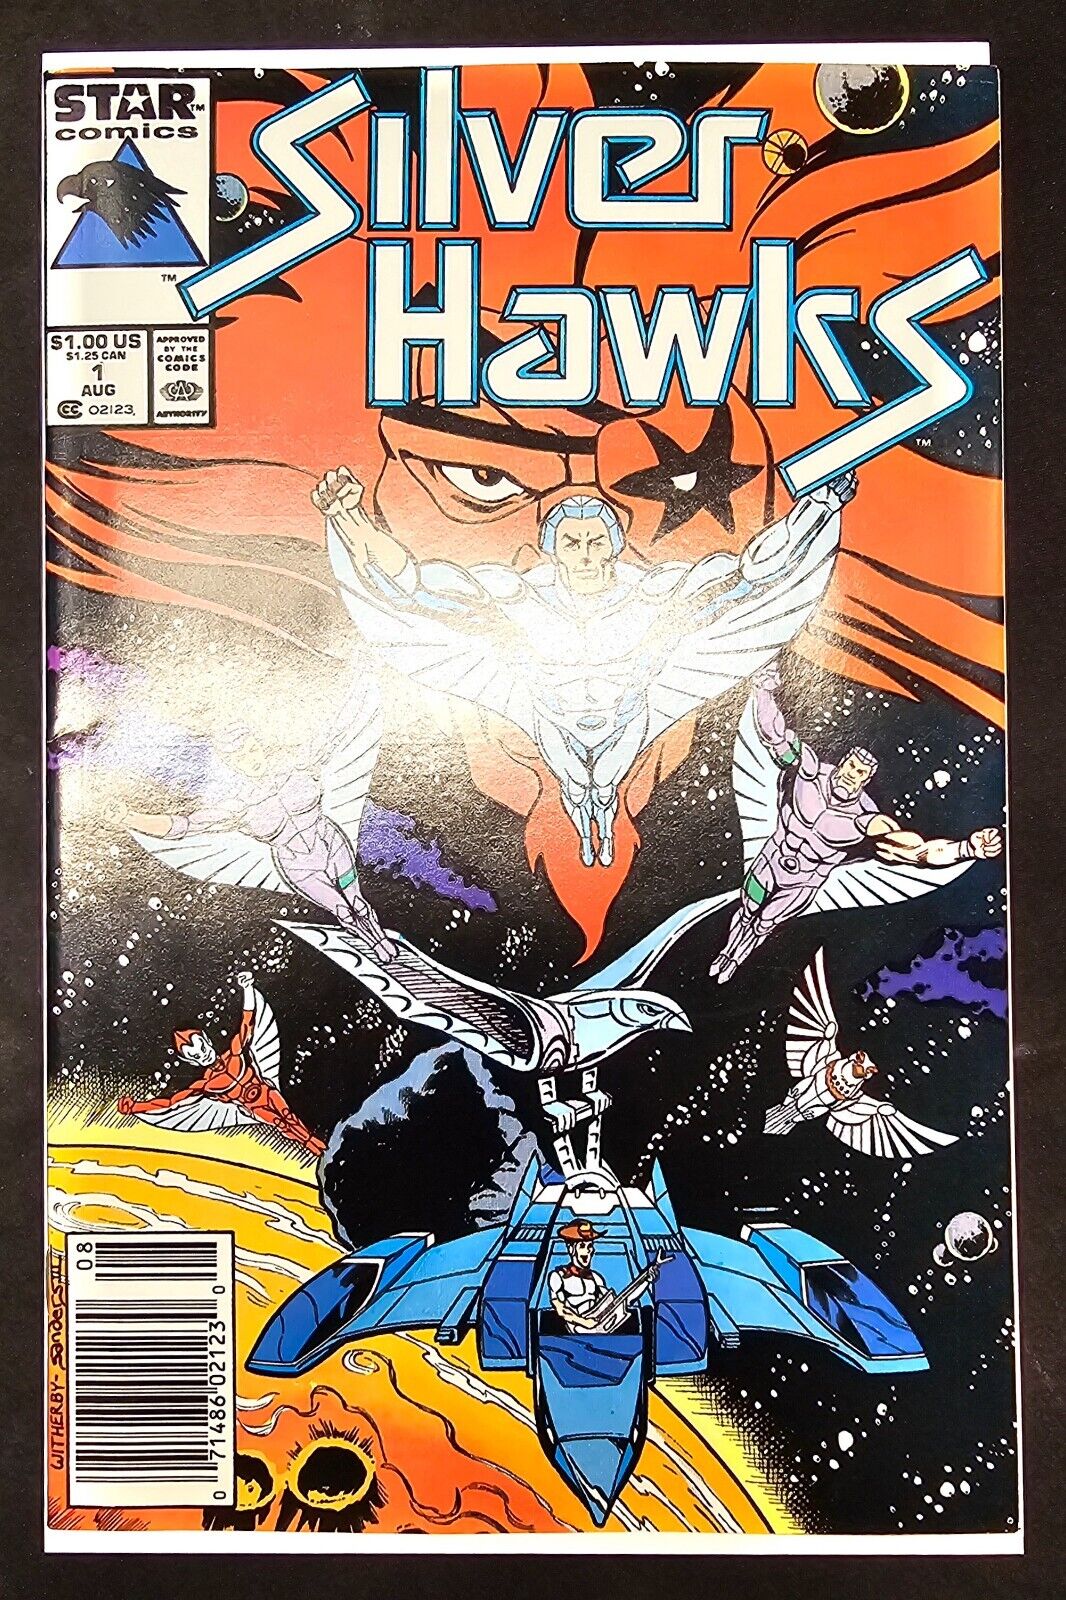 Silver Hawks #1 AND #6 Star Comics Newsstand Edition